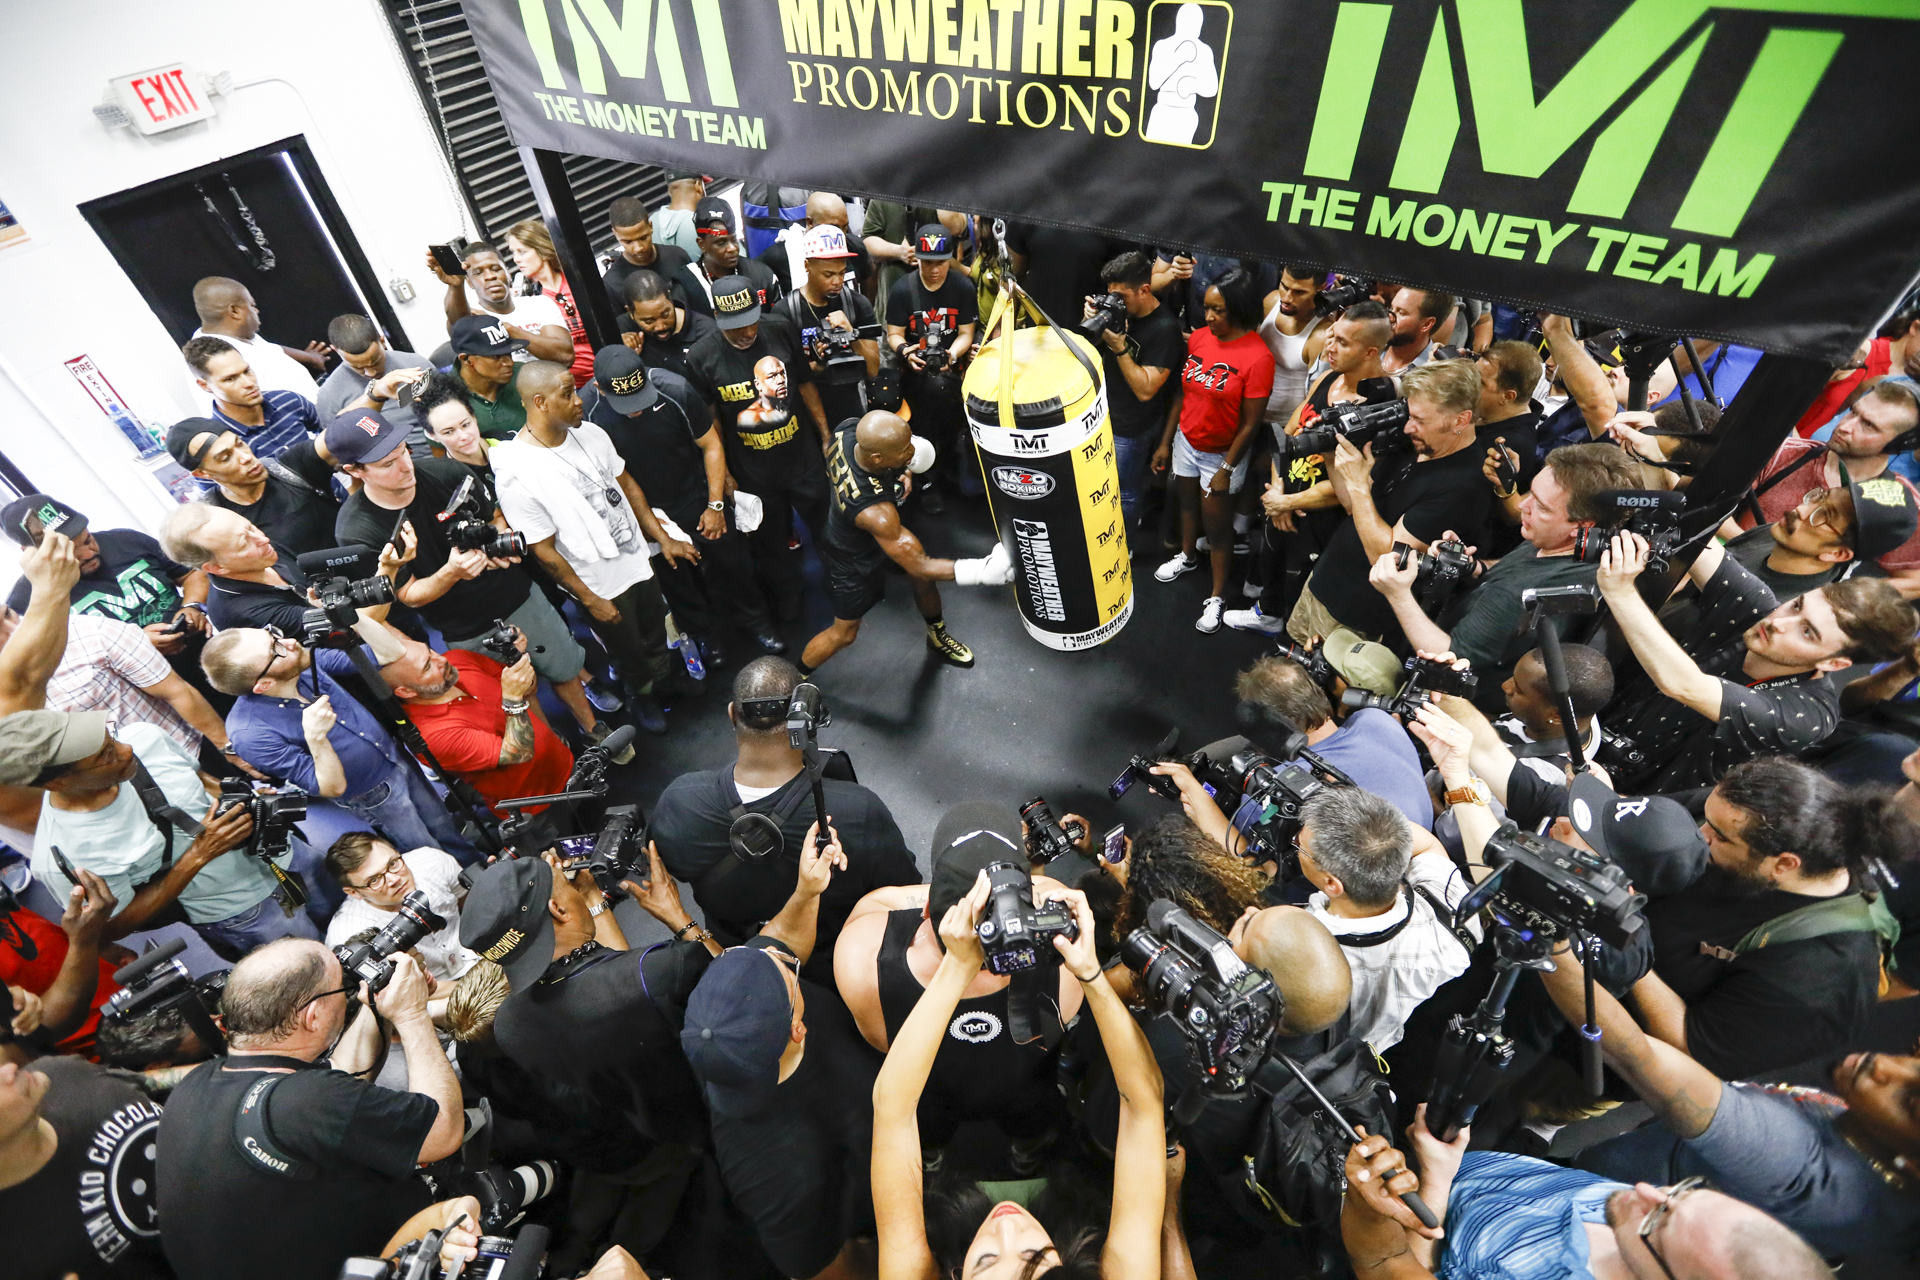 Floyd Mayweather had a packed house Thursday. Esther Lin, Showtime